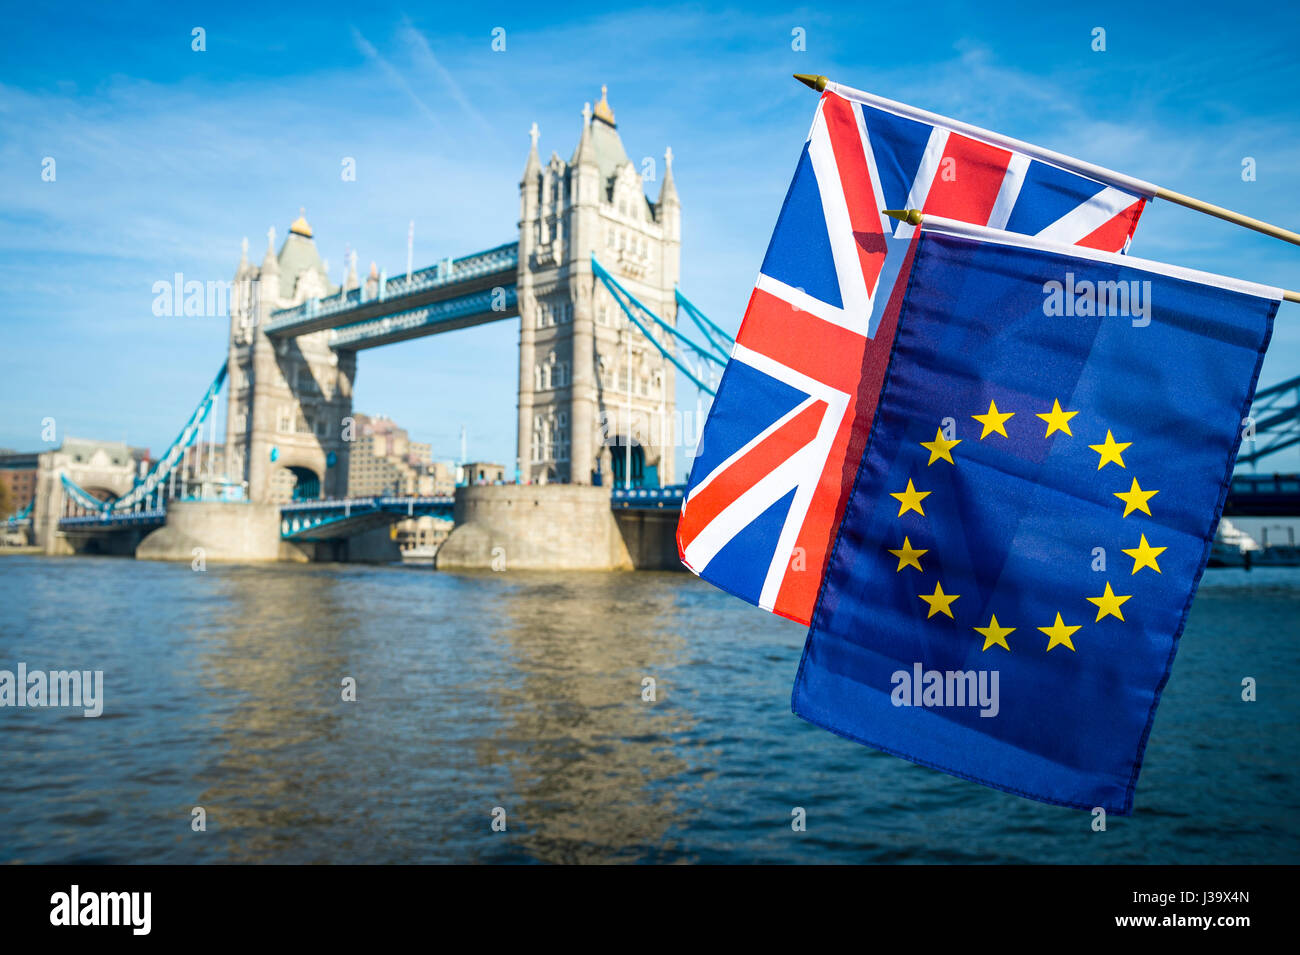 EU European Union and UK United Kingdom flags flying together in Brexit solidarity in front of the London, England skyline at Tower Bridge Stock Photo